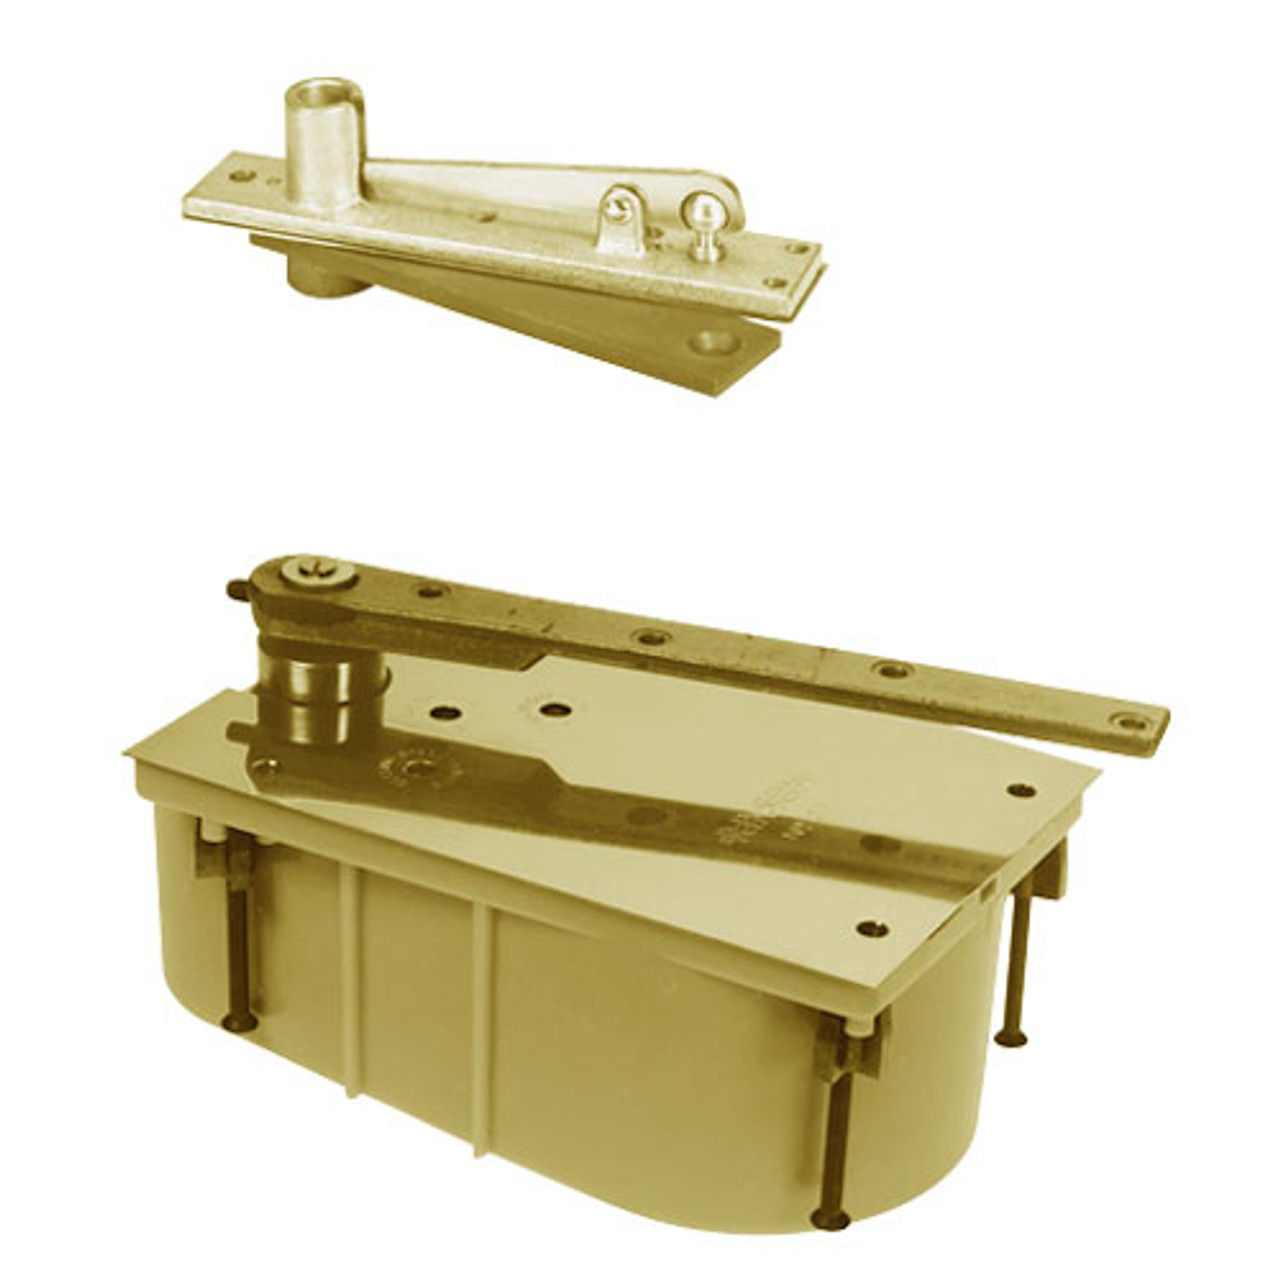 28-105S-554-LFP-RH-606 Rixson 28 Series Heavy Duty Single Acting Center Hung Floor Closer with Concealed Arm in Satin Brass Finish